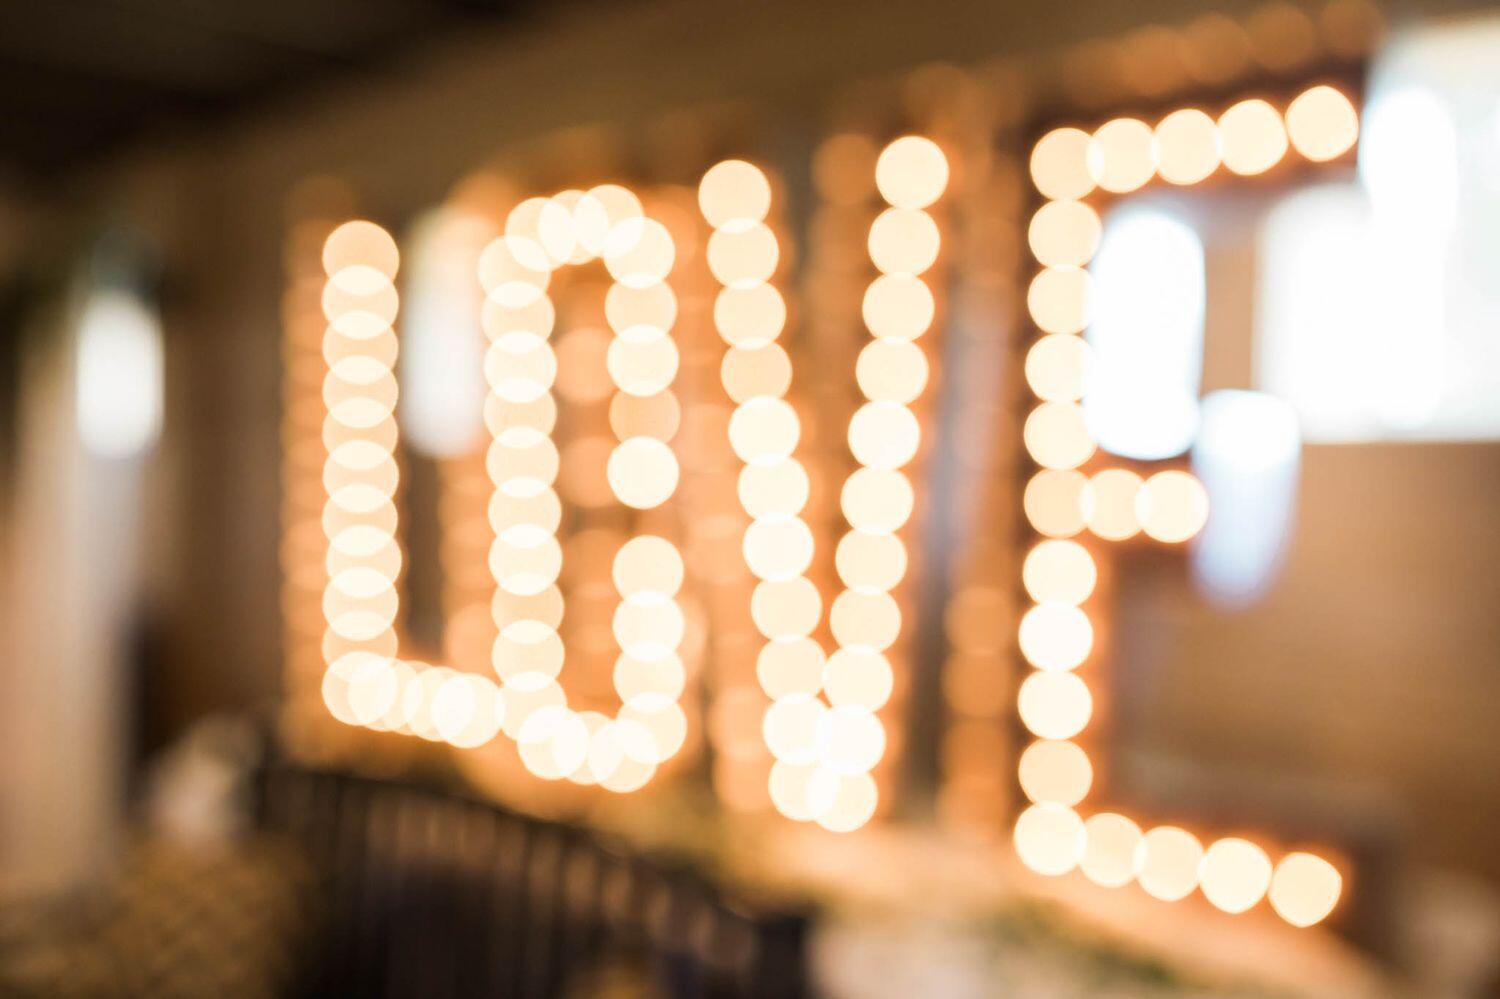 love spelled out in bulb lights